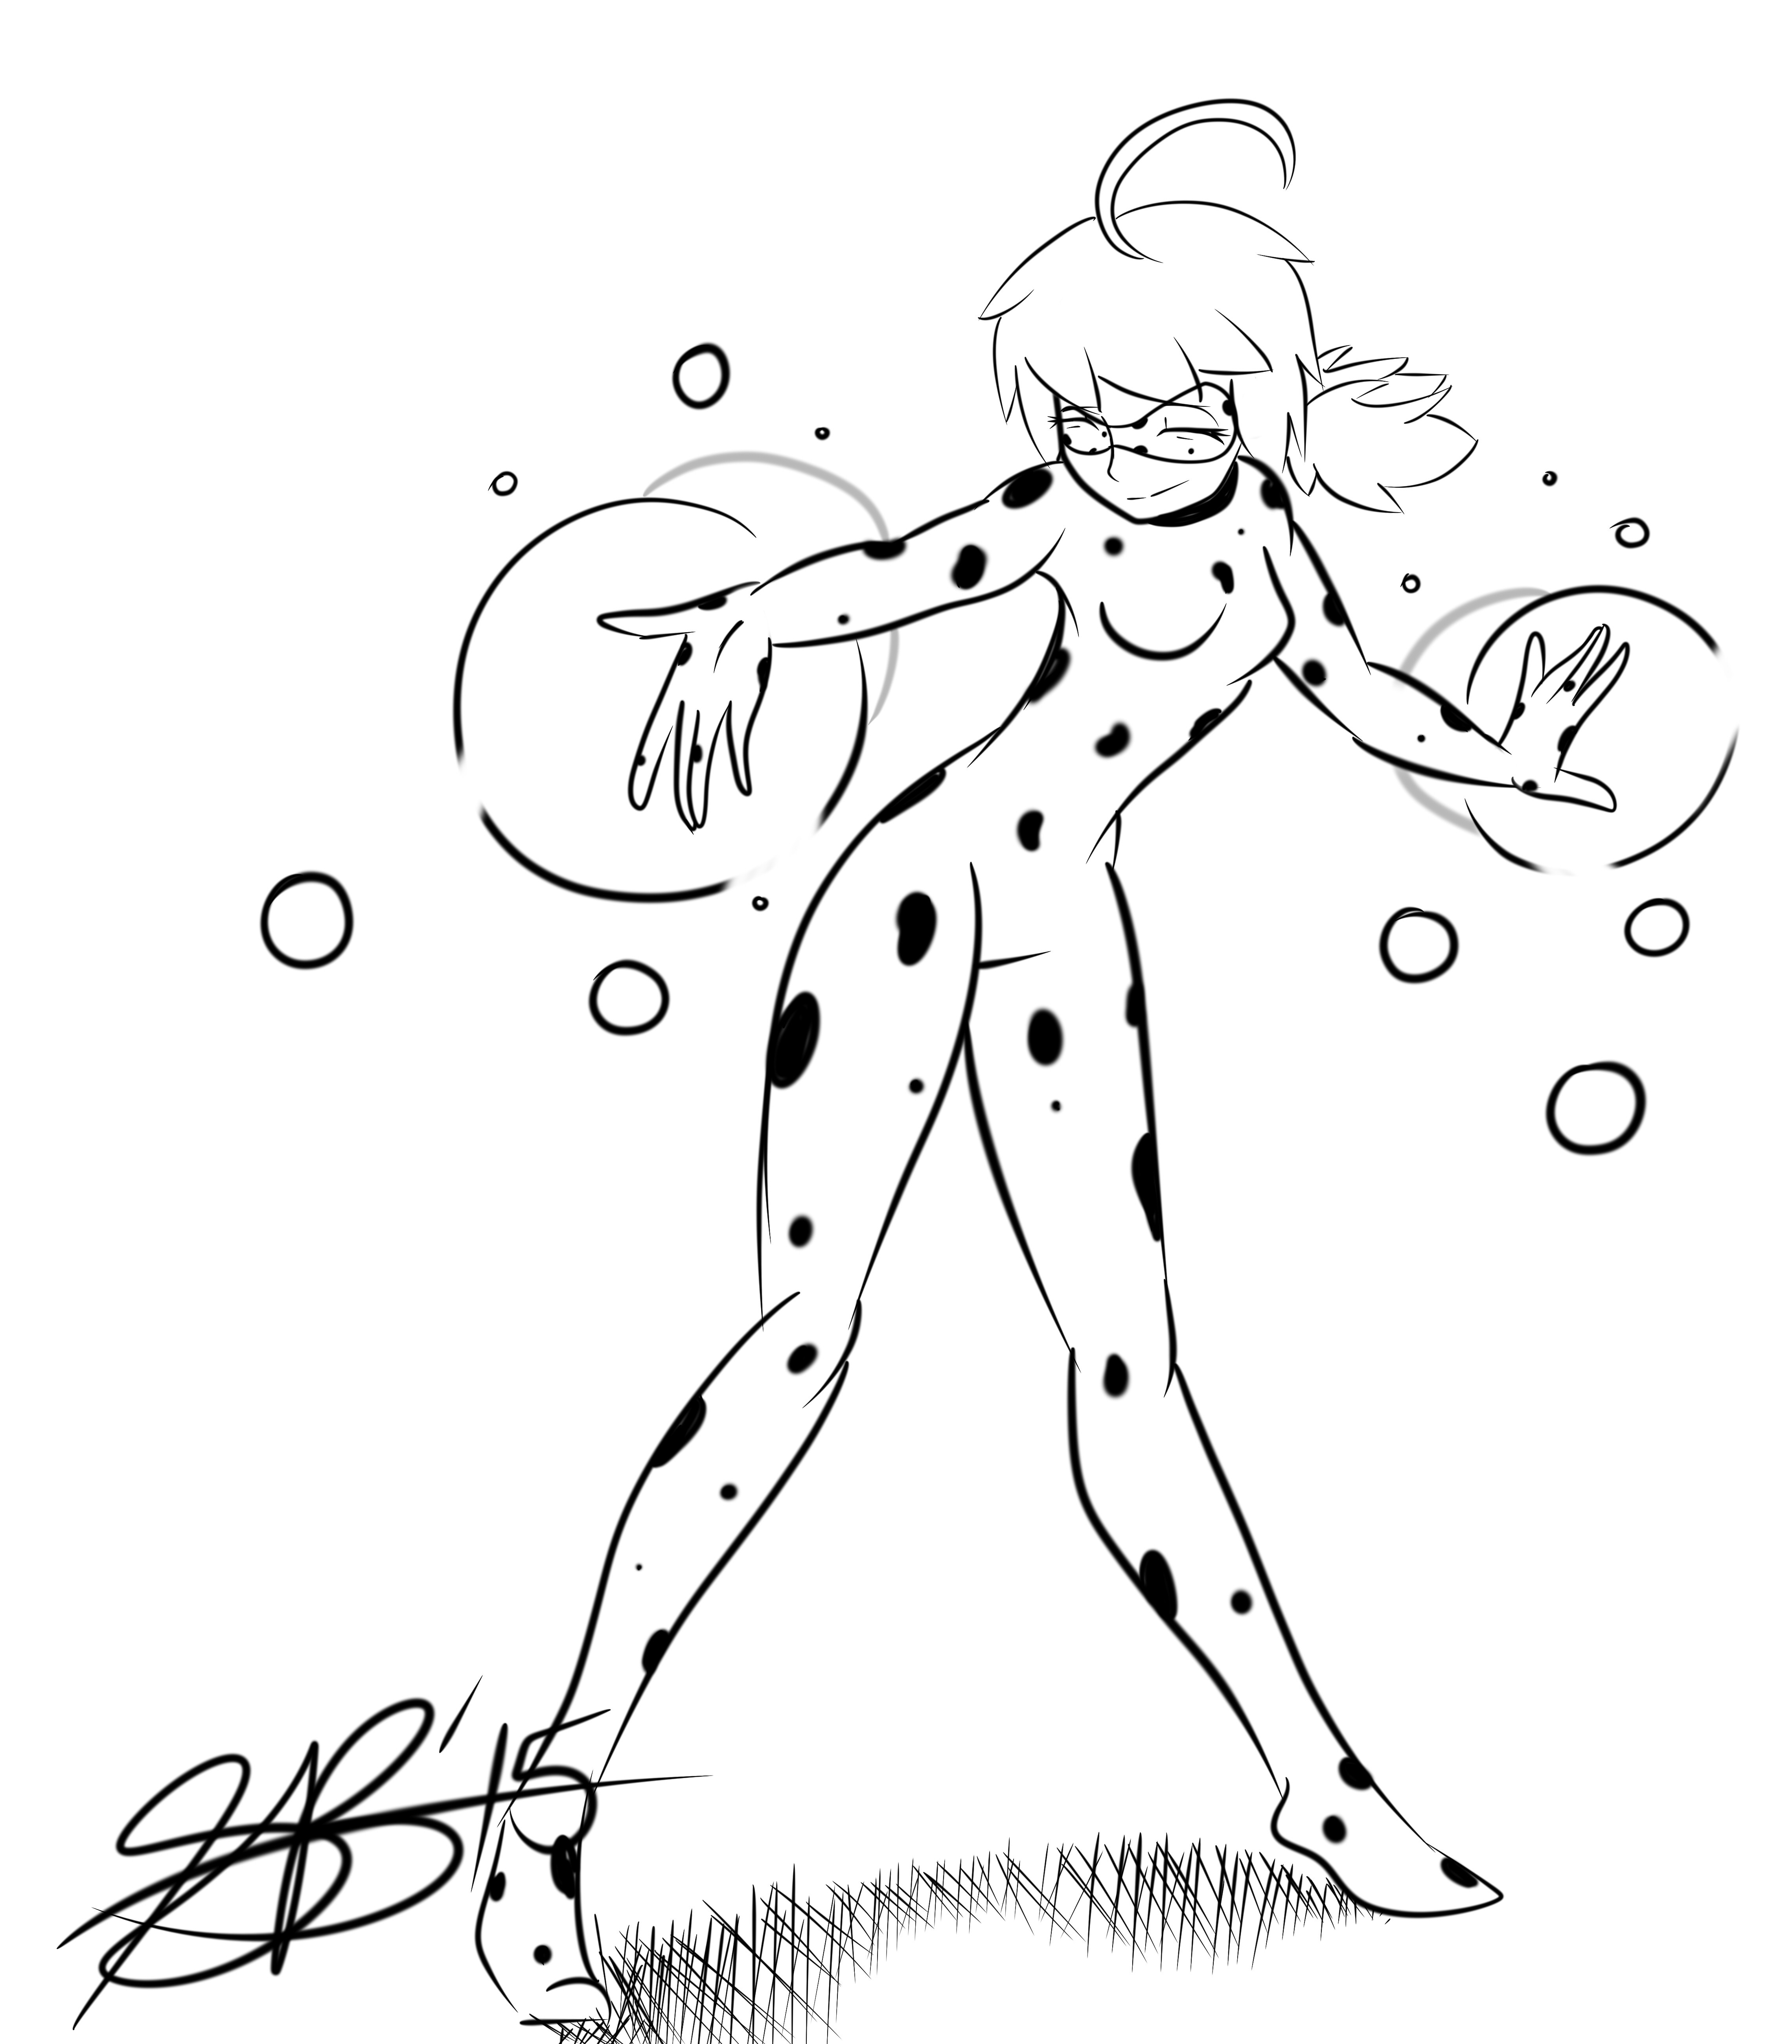 Ladybug and Cat Noir Coloring Pages Luxury Coloring Turtles Pages Free 1845 Unknown Resolutions Ladybug